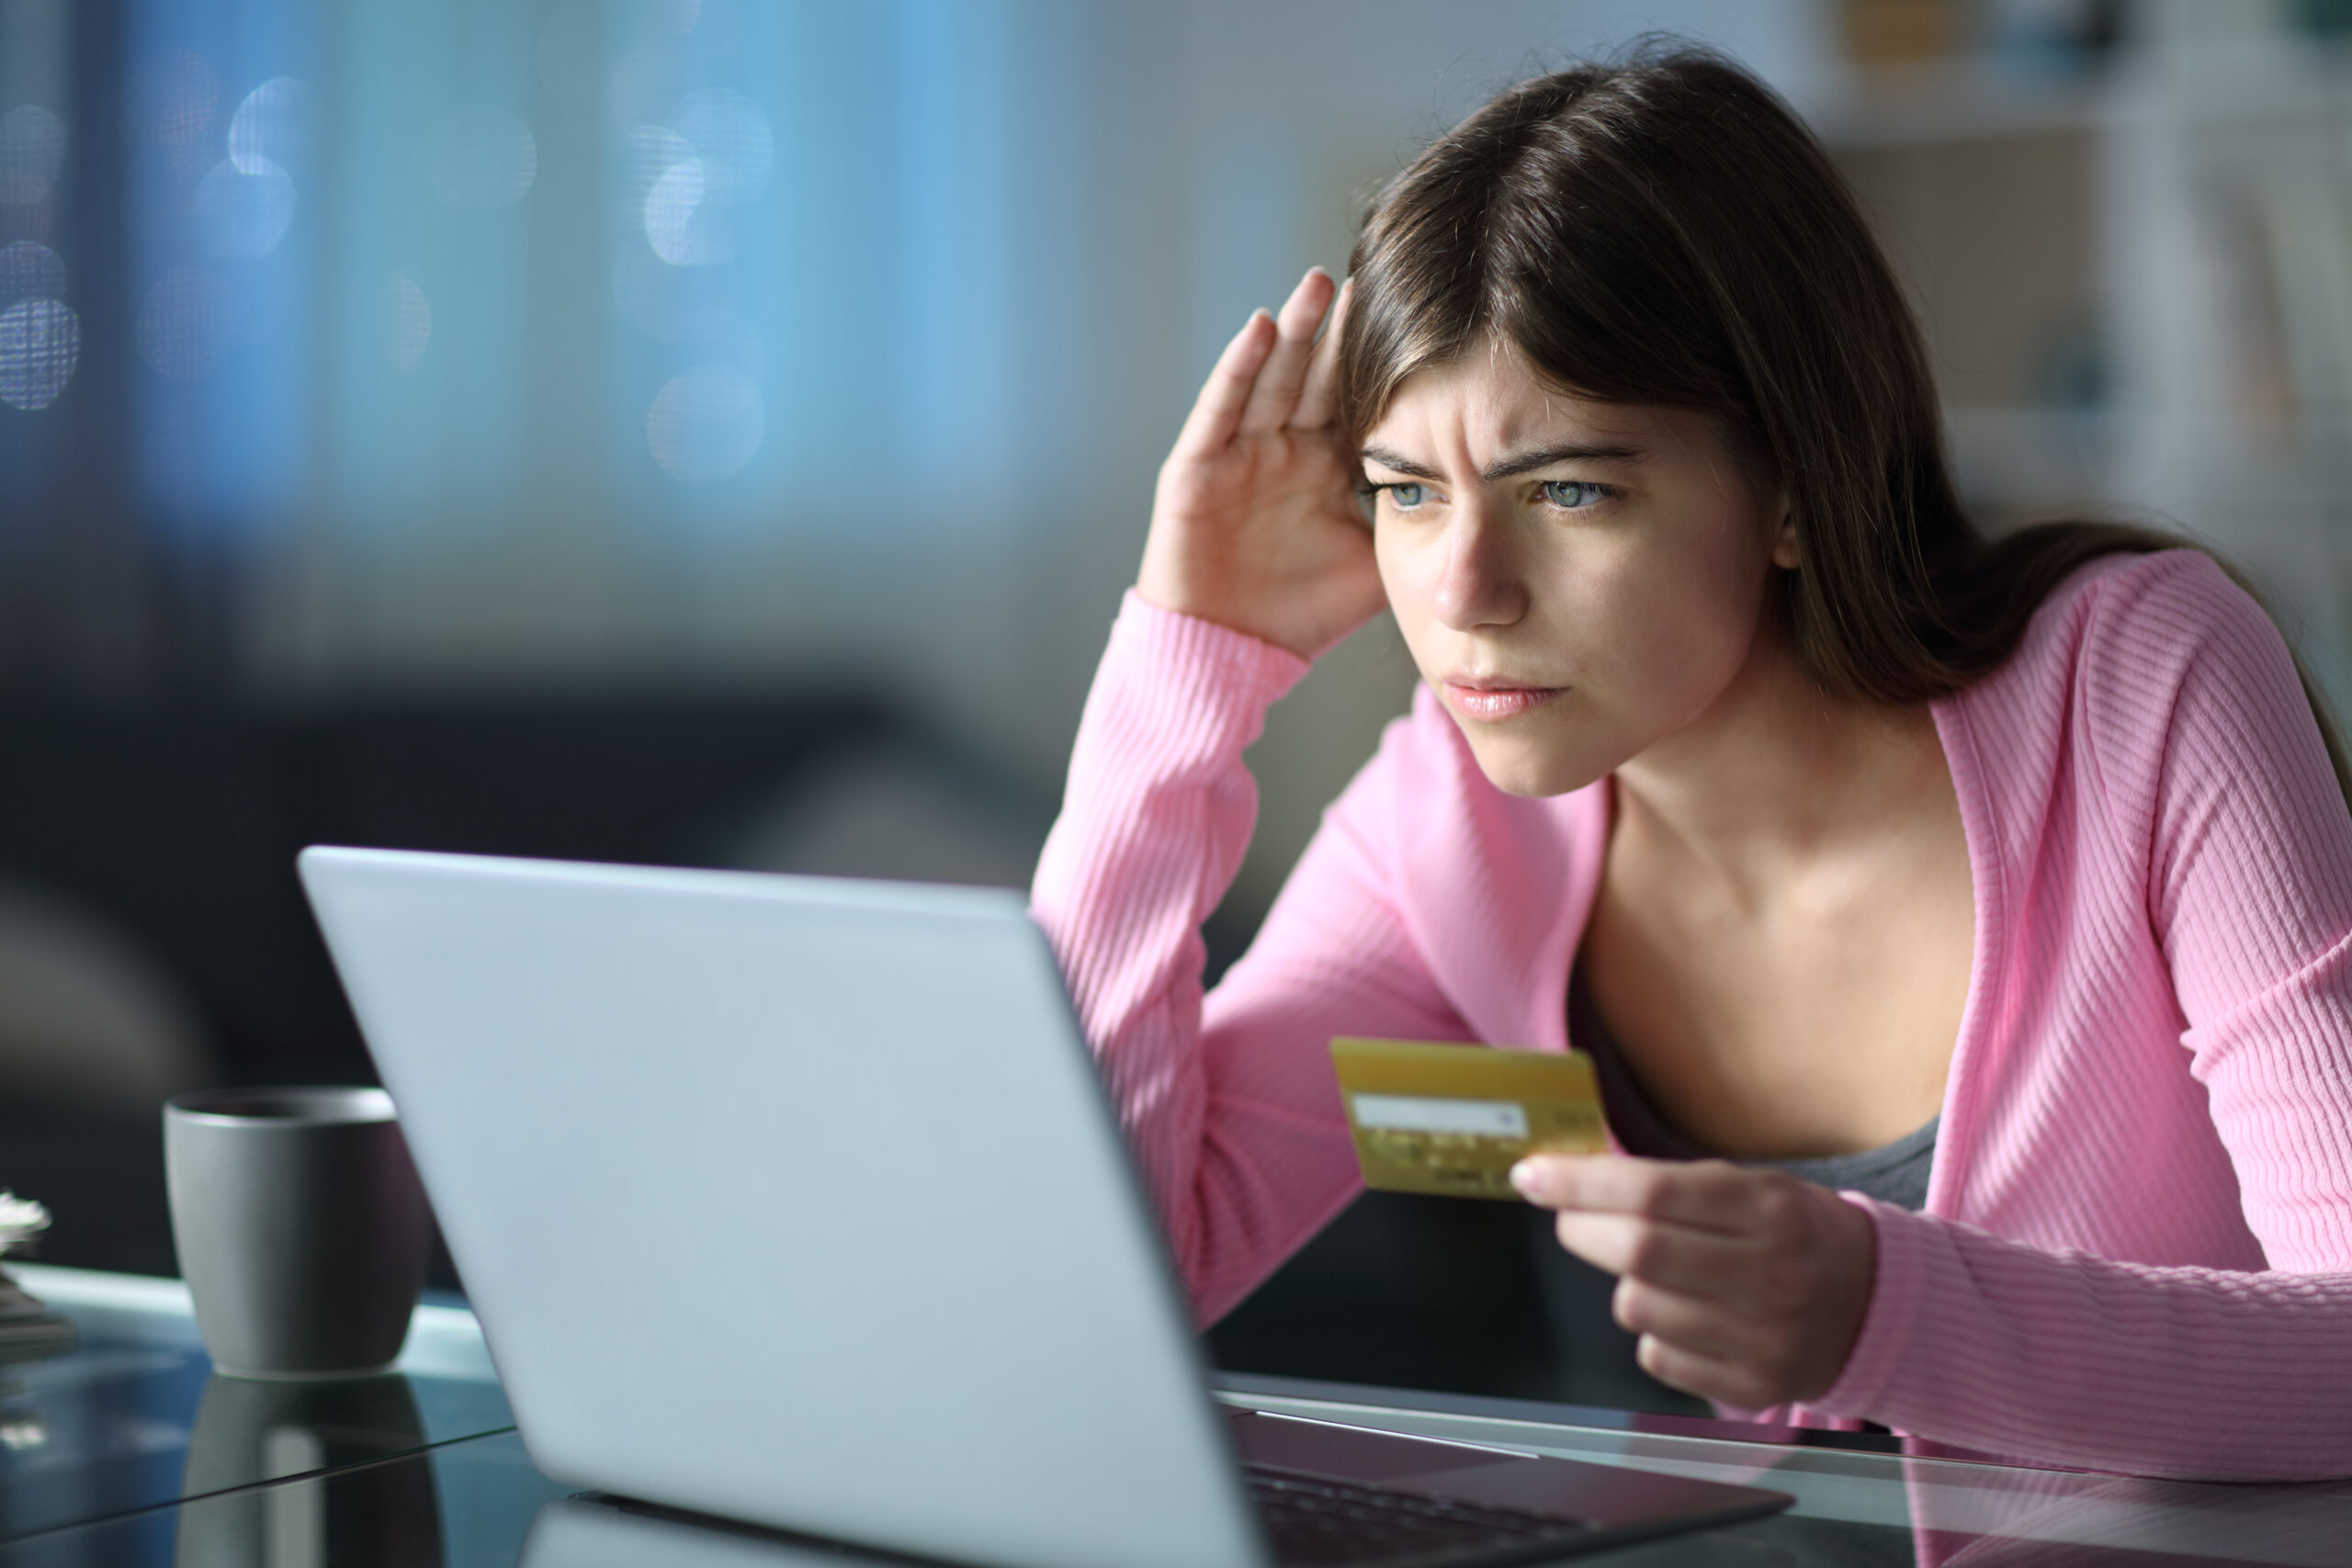 stock image of a worried-looking teenage girl sitting in front of a laptop while holding a credit card